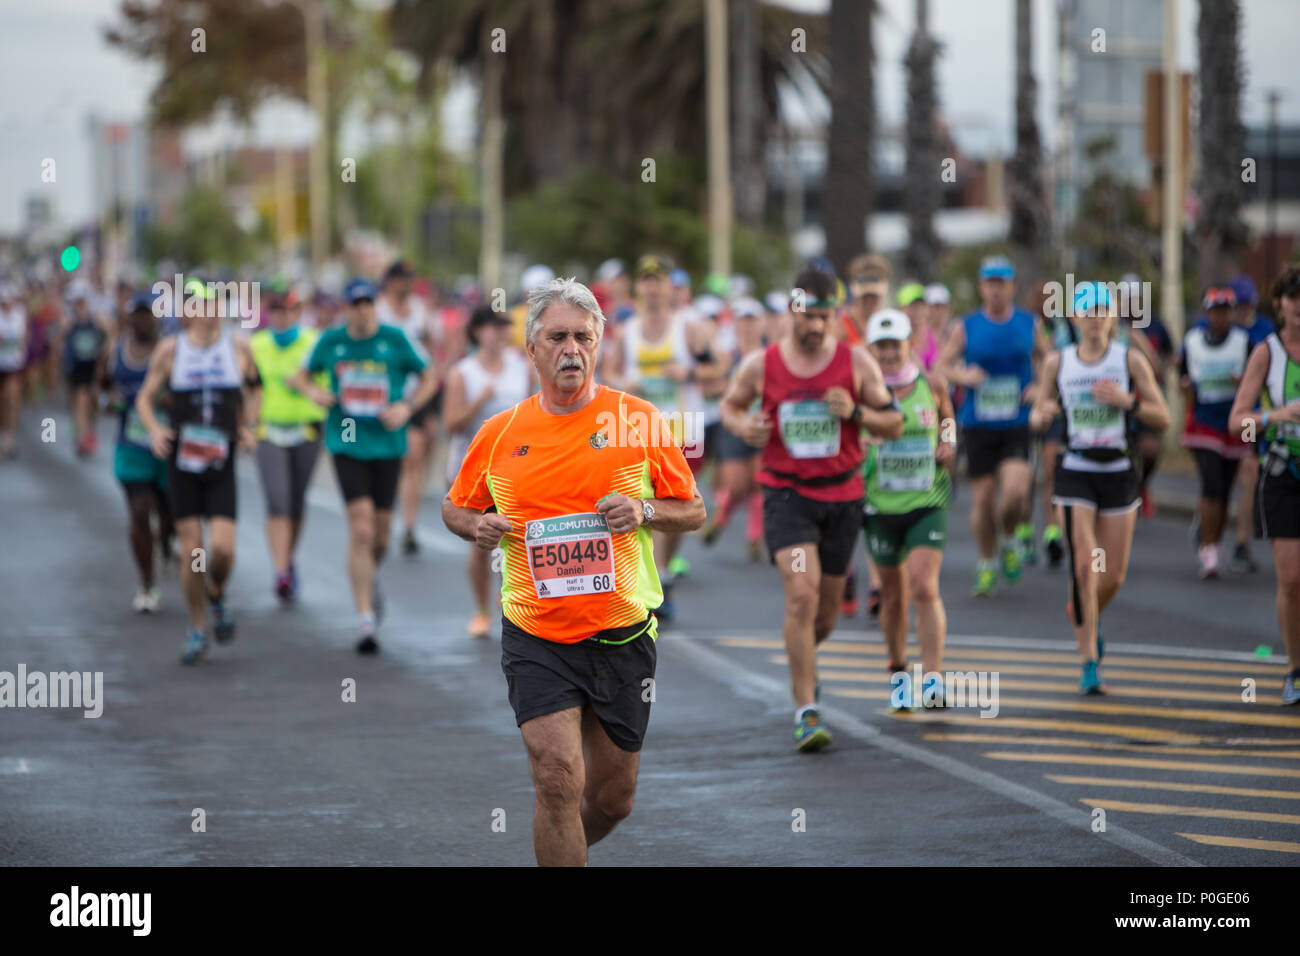 a runner looking tired during the two oceans marathon wearing a bright orange shirt Stock Photo